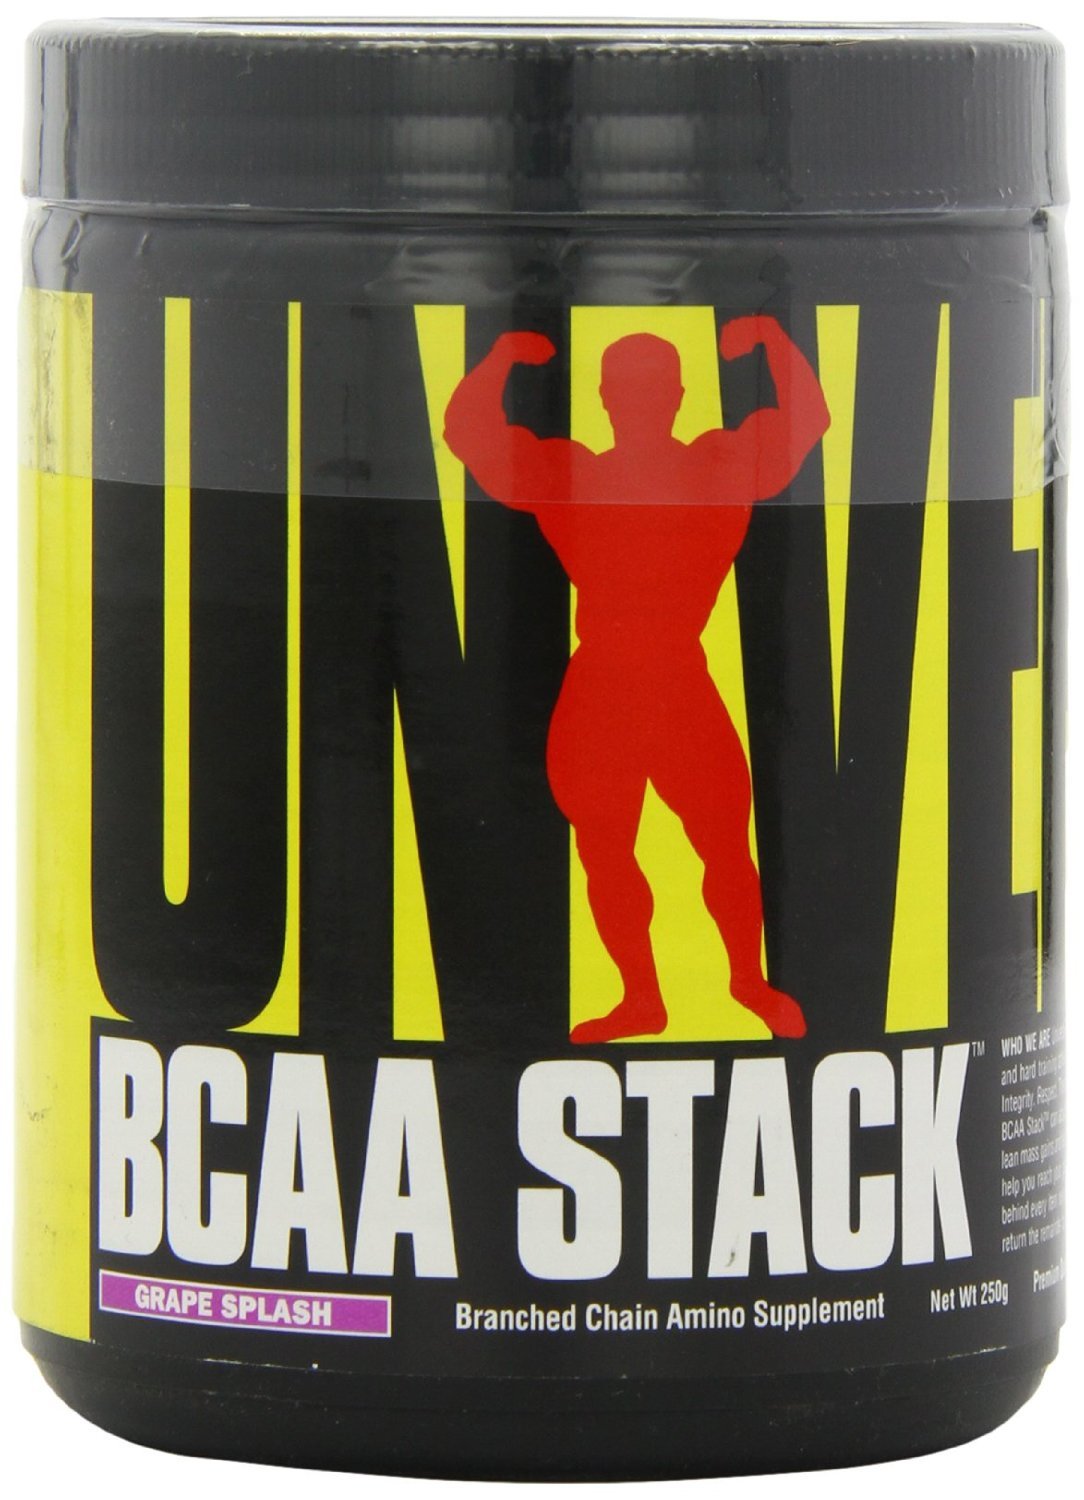 BCAA Stack, 250 g, Universal Nutrition. BCAA. Weight Loss recuperación Anti-catabolic properties Lean muscle mass 